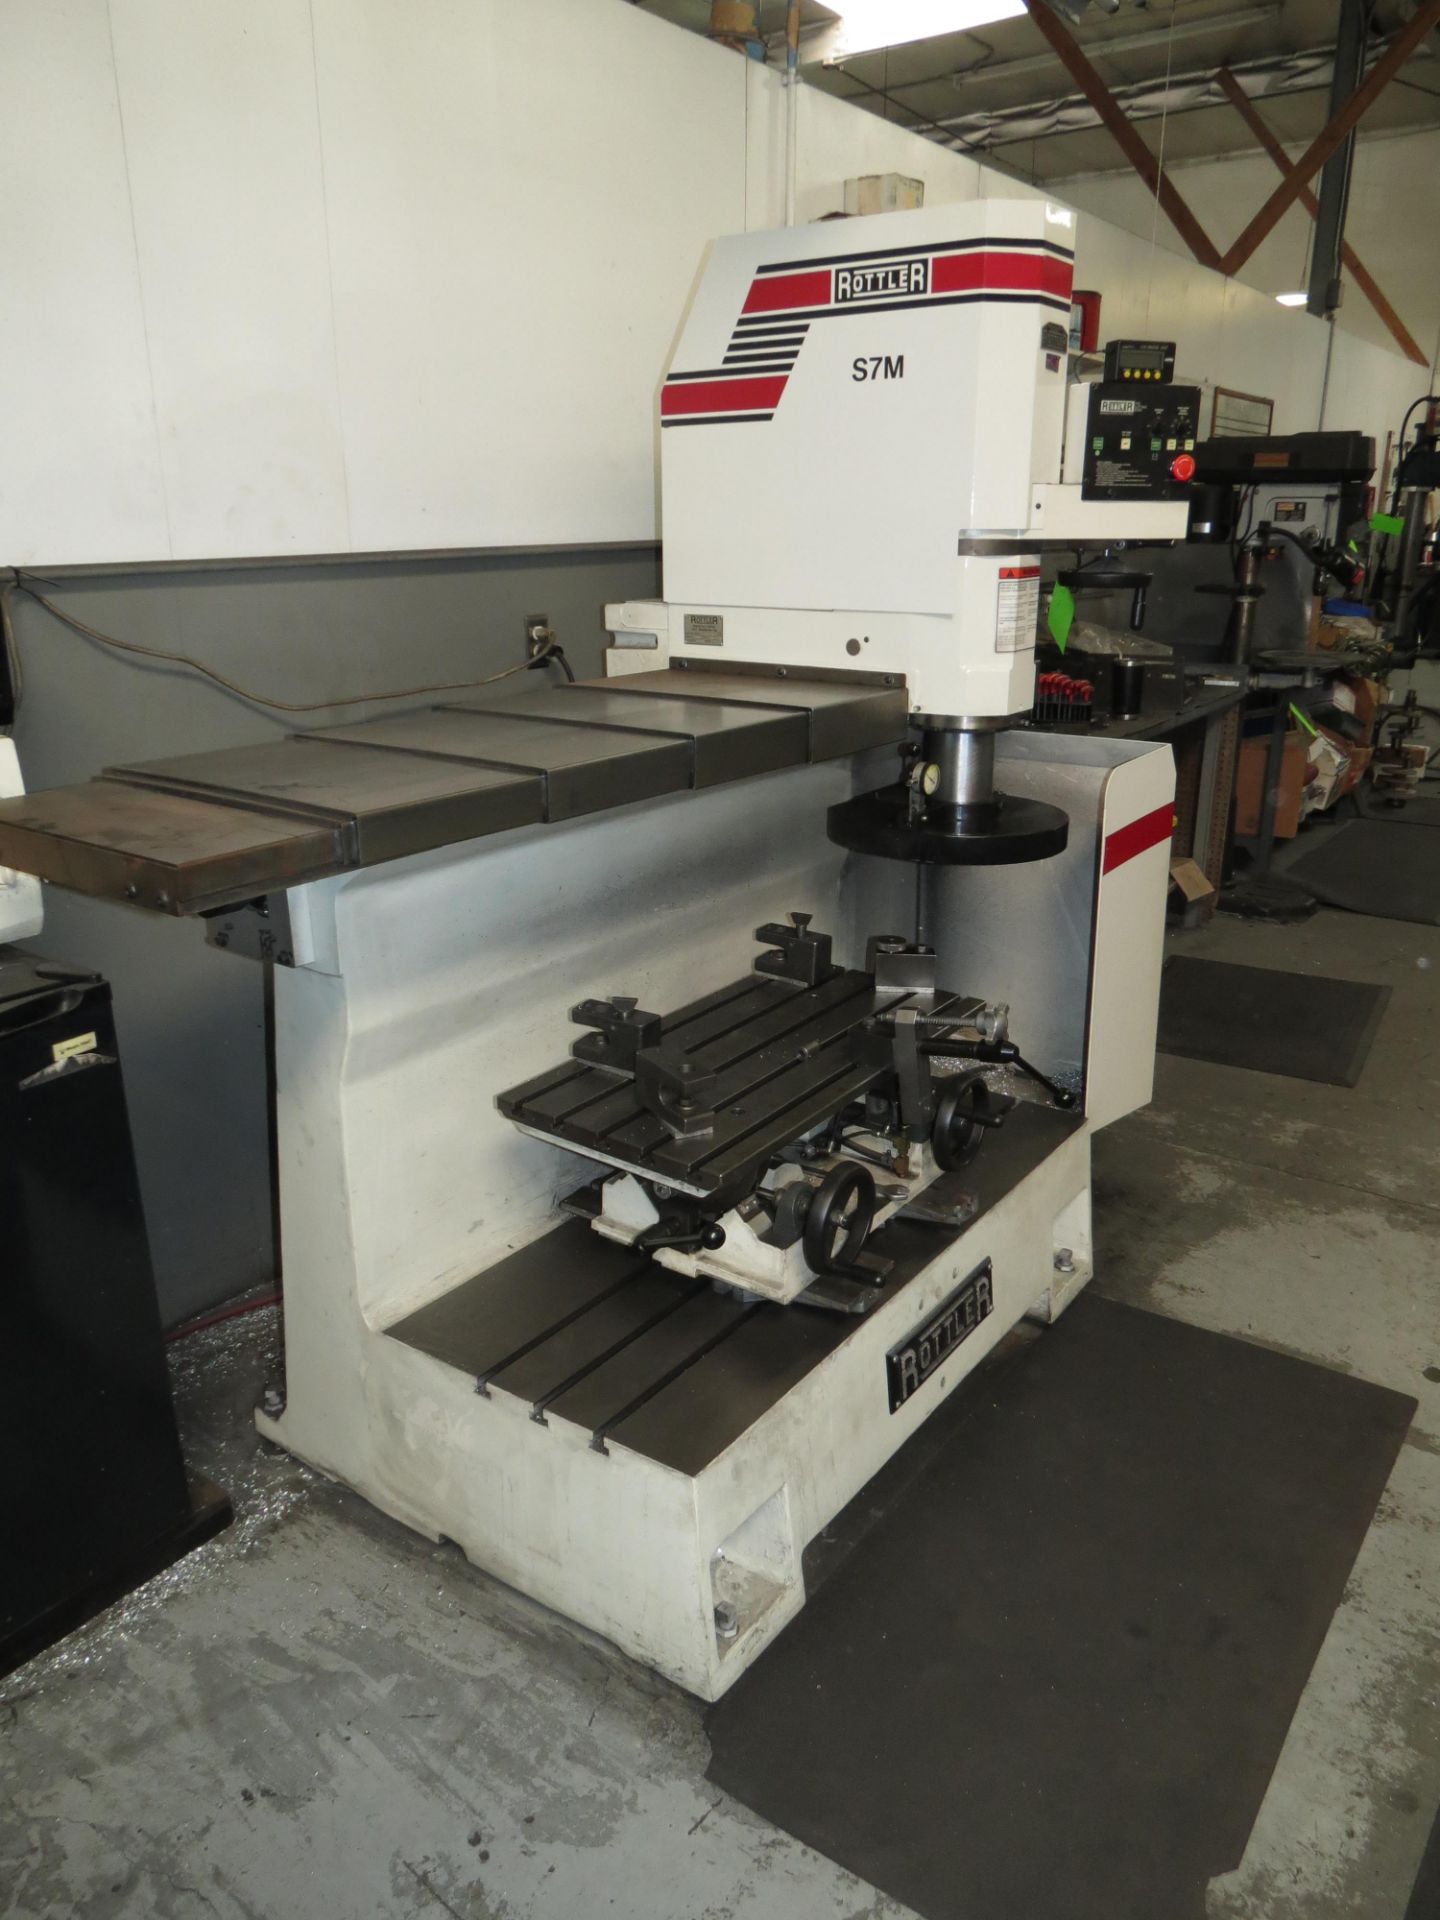 ROTTLER S7M CBM CYLINDER HEAD AND BLOCK SURFACER, WITH UPGRADED 15" X 30" X 2" TILT TABLE - Image 7 of 10